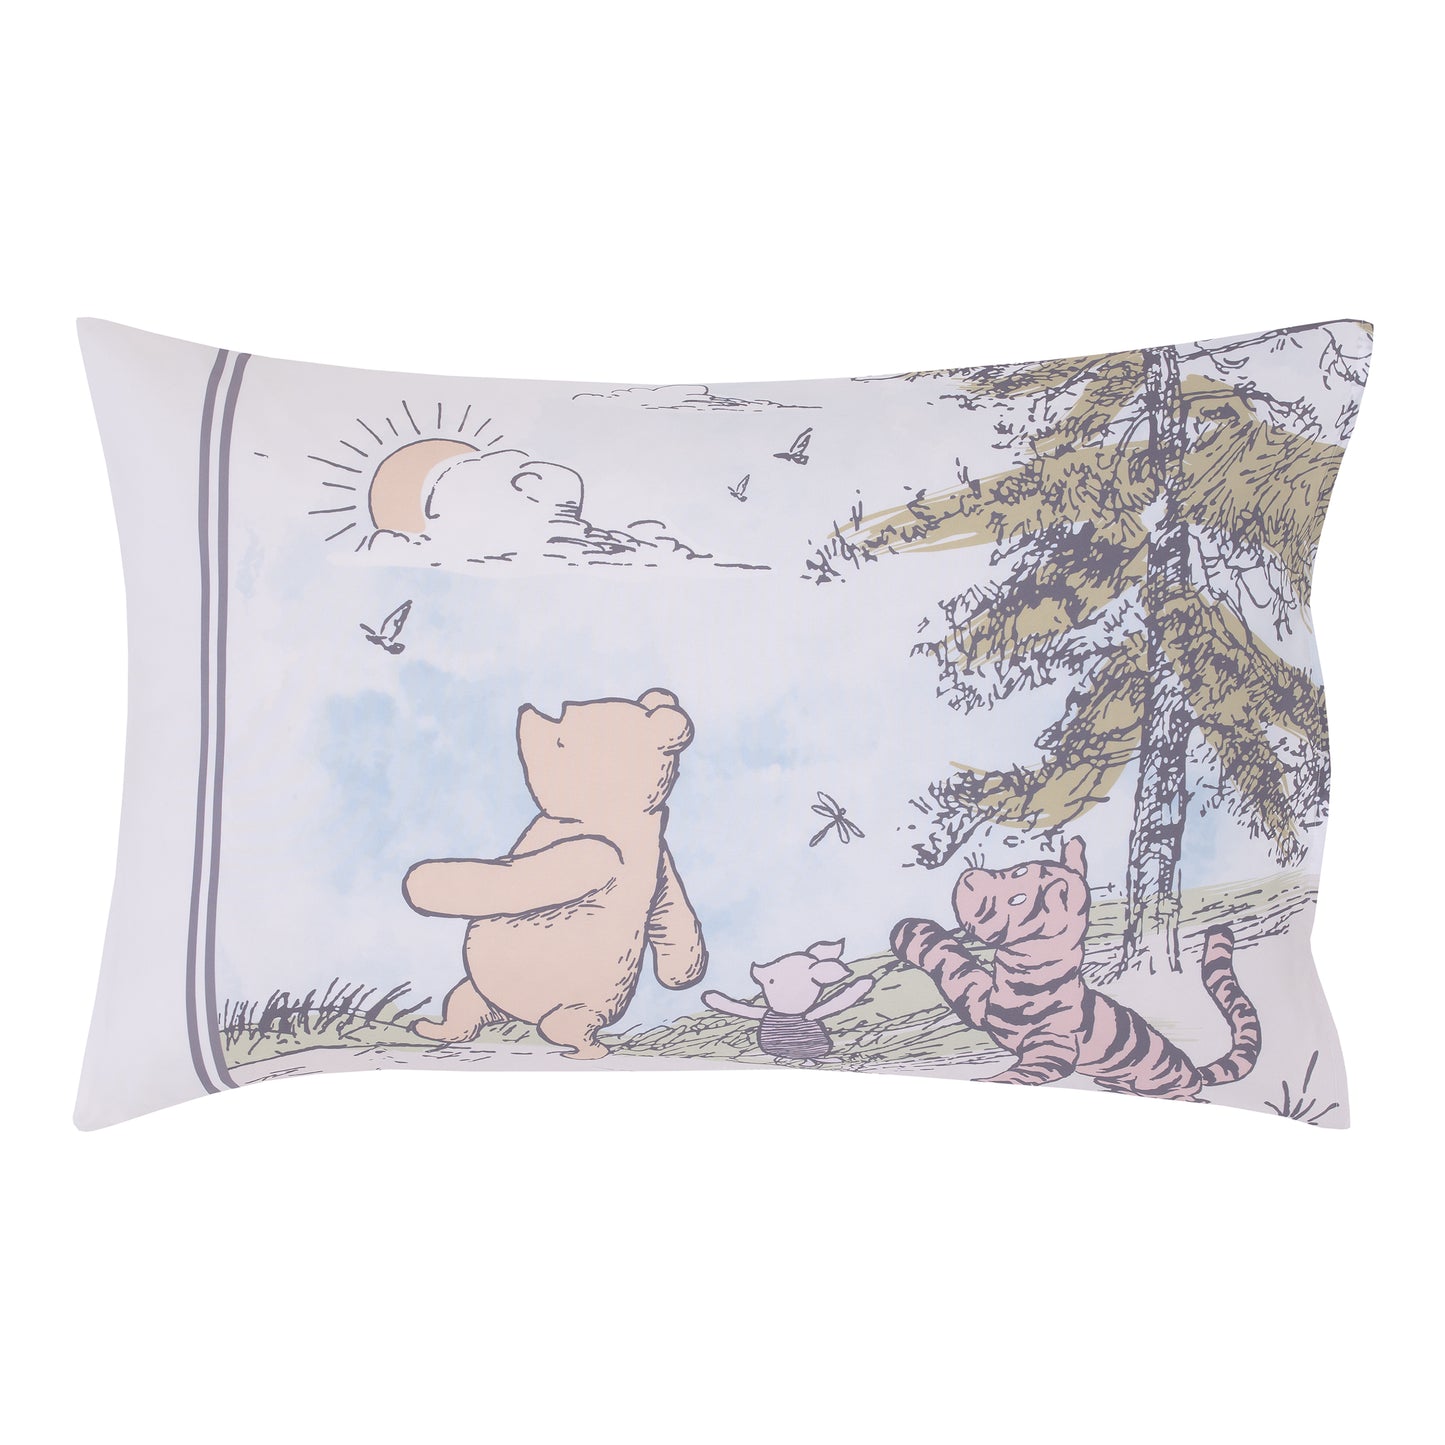 Disney Classic Winnie the Pooh Light Blue, Green, and Yellow, Snuggly Sort of Day 4 Piece Toddler Bed Set - Comforter, Fitted Bottom Sheet, Flat Top Sheet, and Reversible Pillowcase